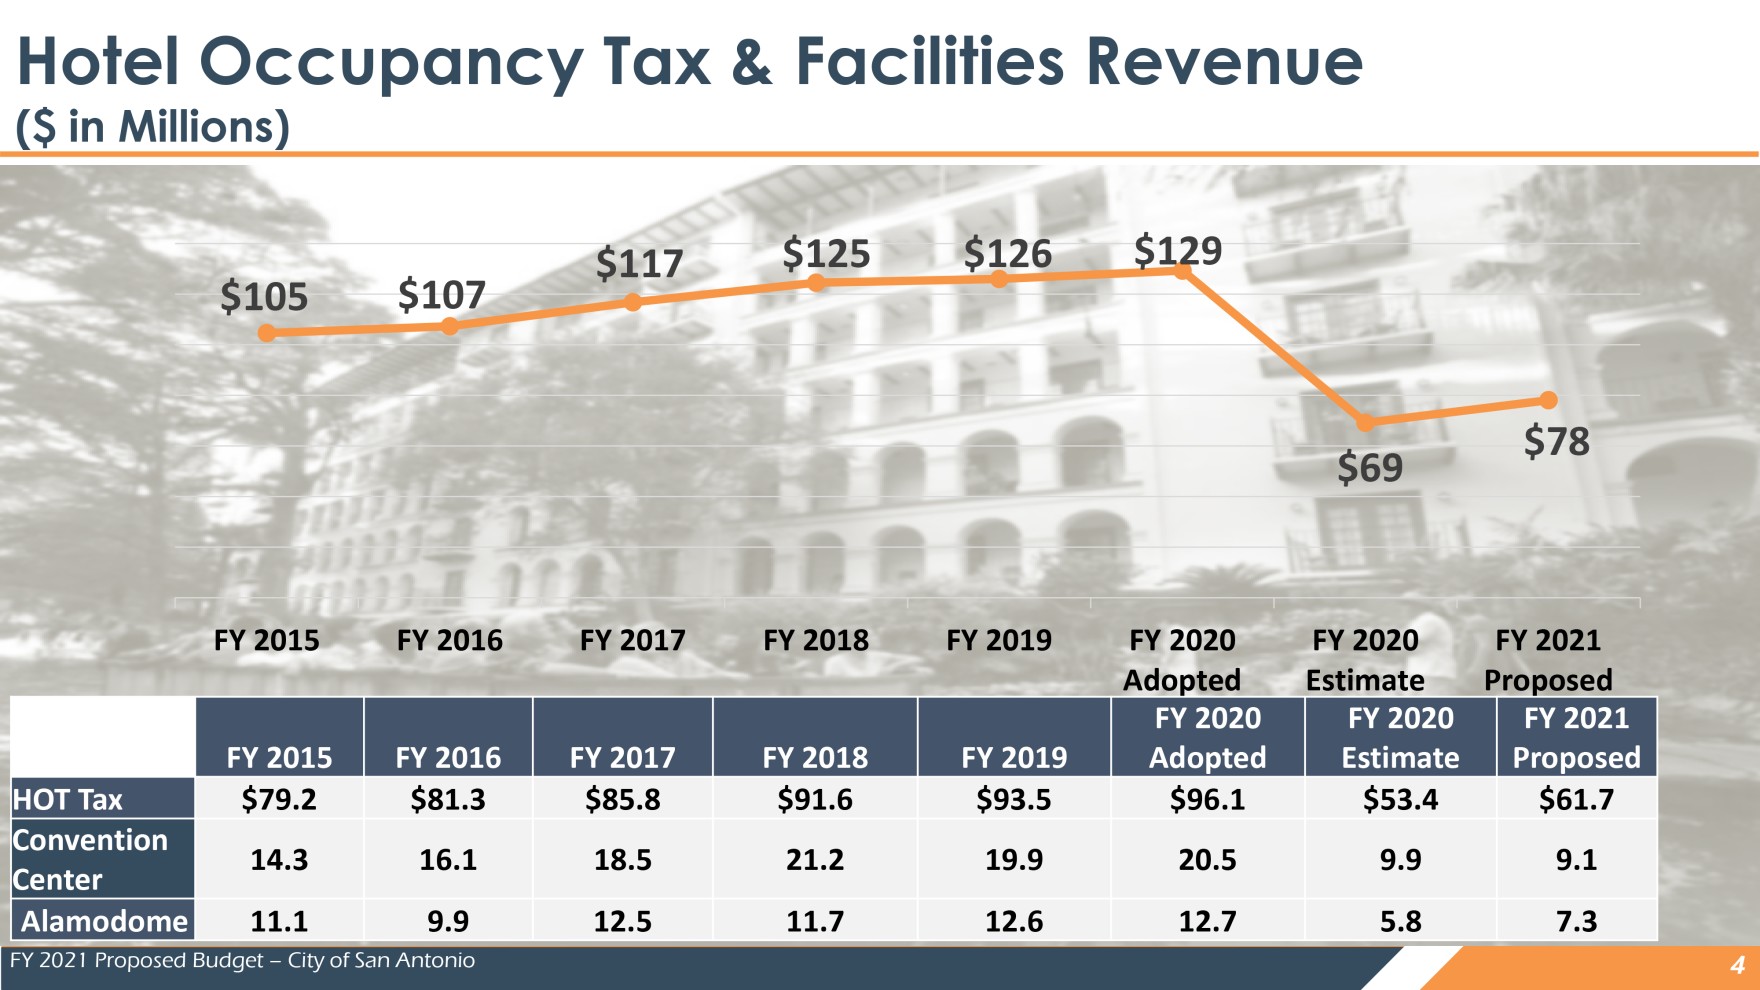 A chart showing the hotel occupancy tax revenue amounts and estimates from 2015-2021.